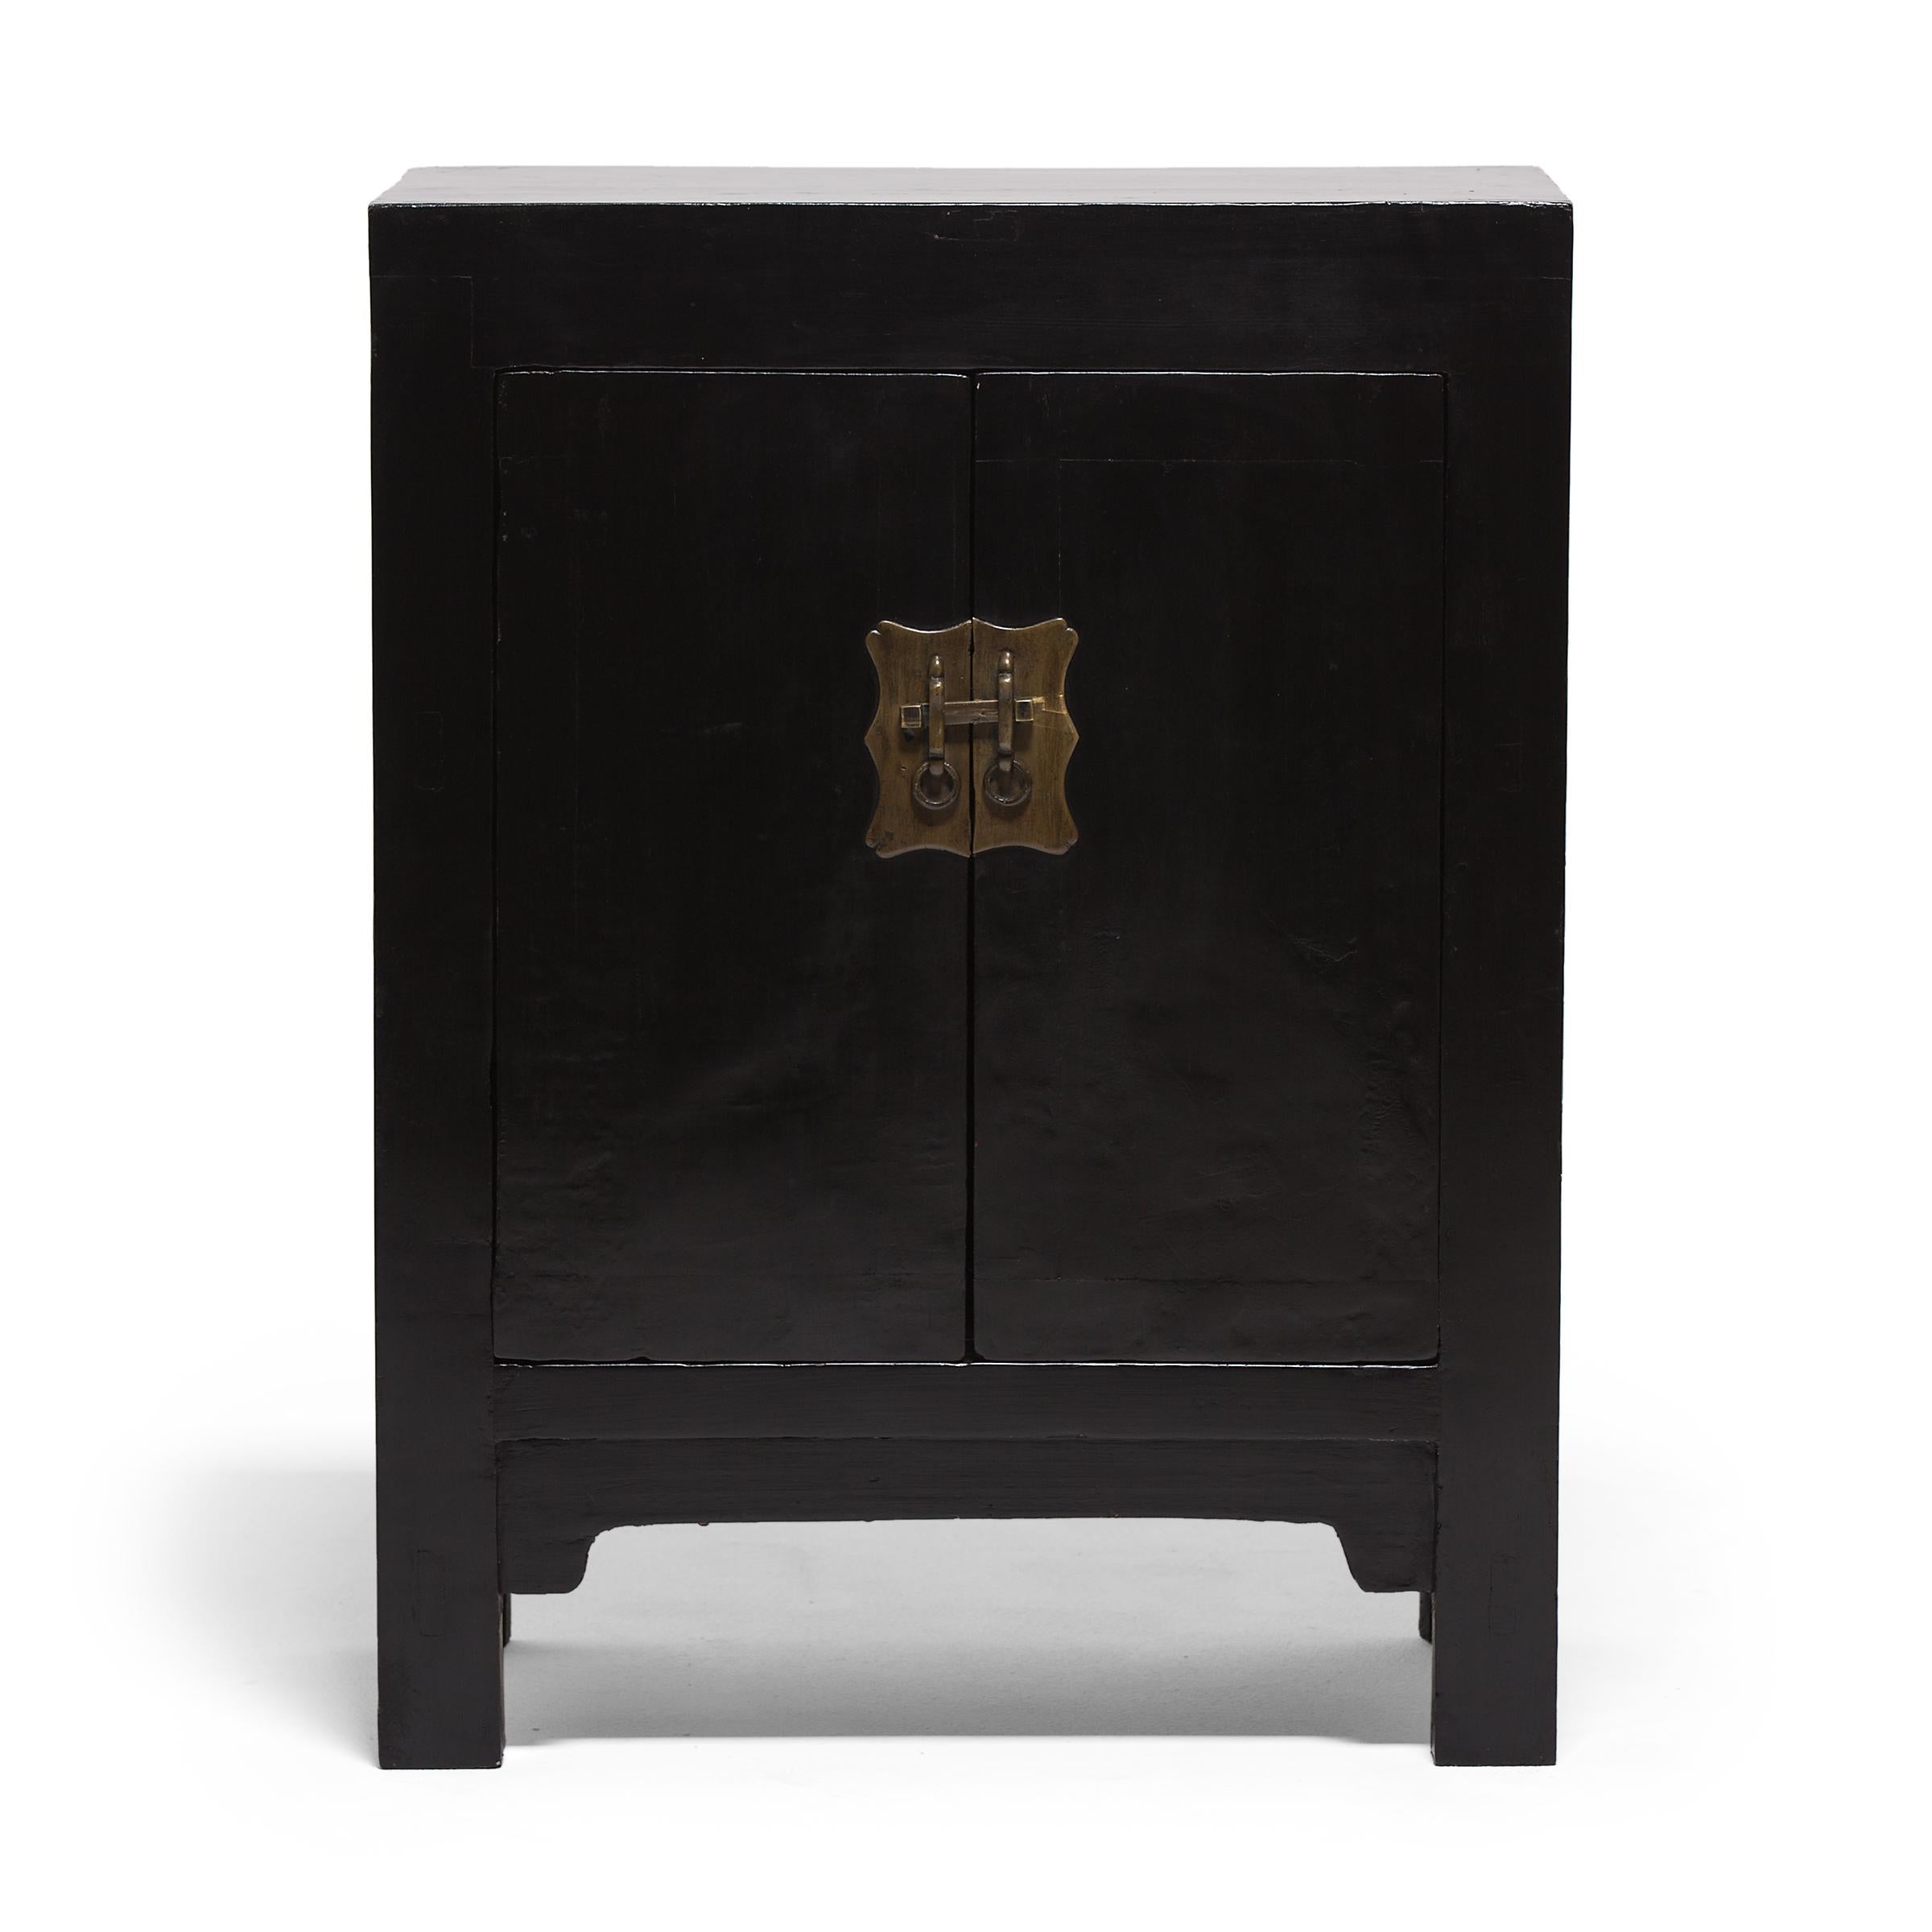 Perfecting line and proportion, the simple design of this pair of locking cabinets celebrates the restraint of Classic Chinese furniture forms. Used for storage in a Qing-dynasty home, the pair of small square-corner cabinets would have been placed